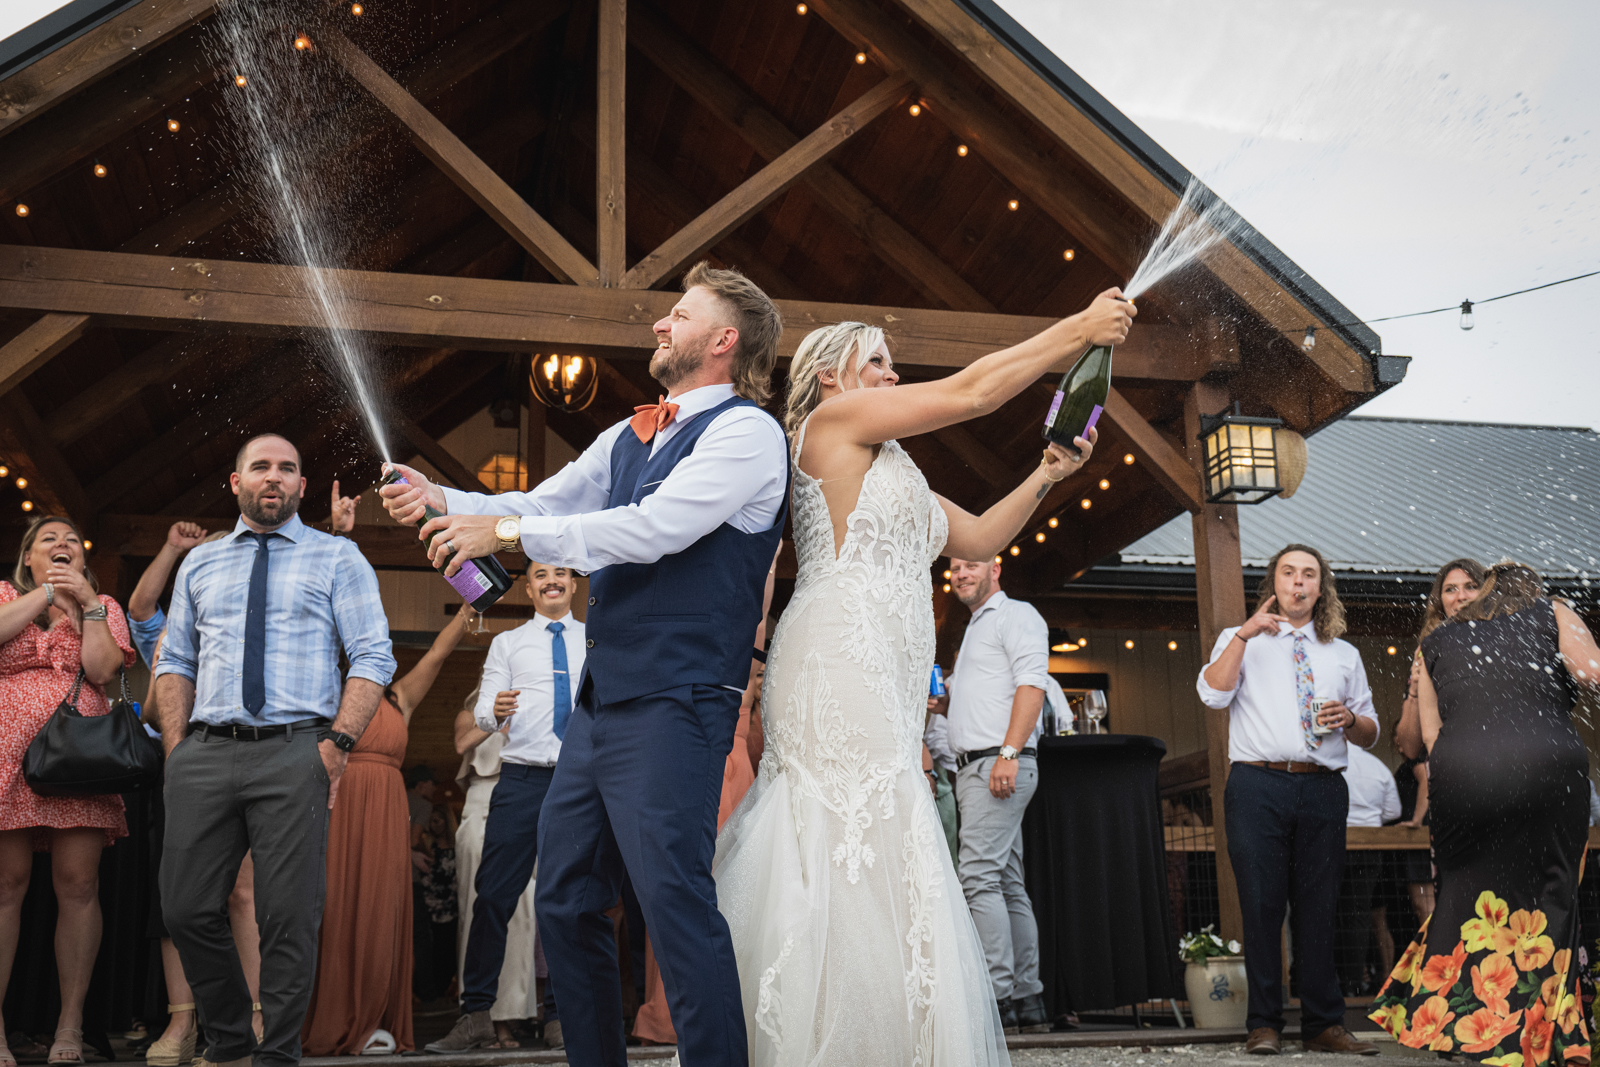 A Perfect Love Story Captured: Megan and Kevin’s Unforgettable Wedding at Townline Trails